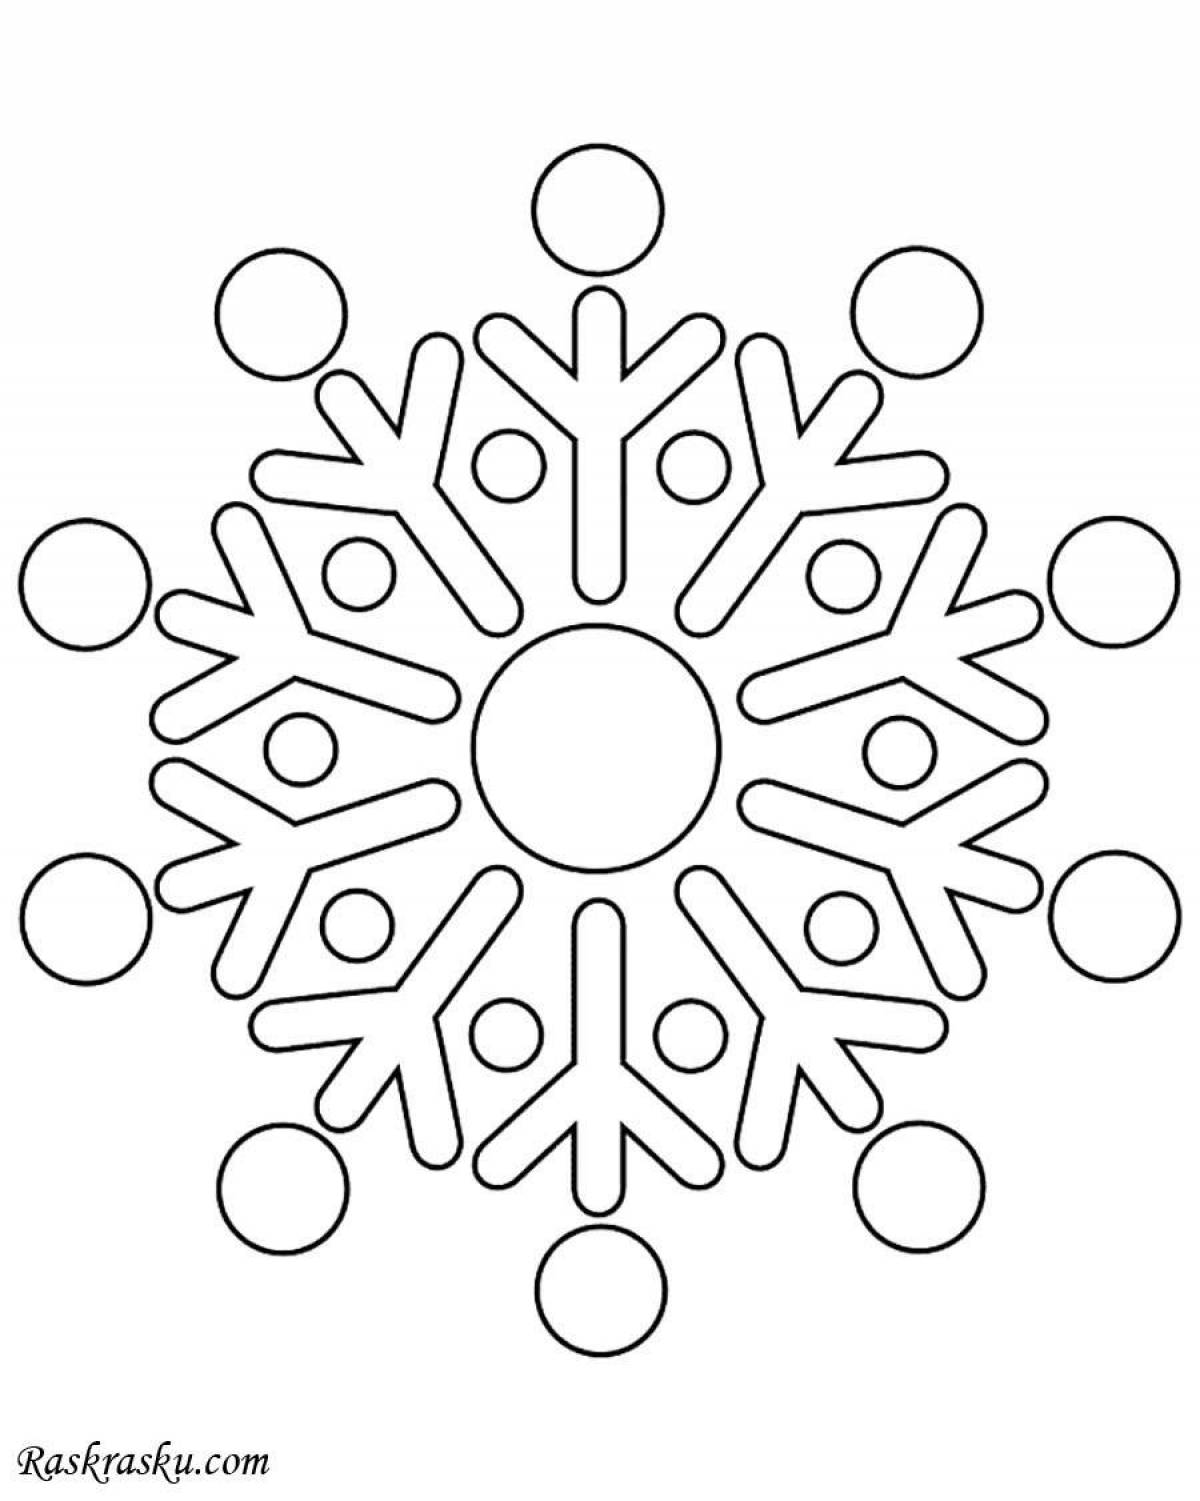 Sweet snowflake coloring book for kids 5-6 years old